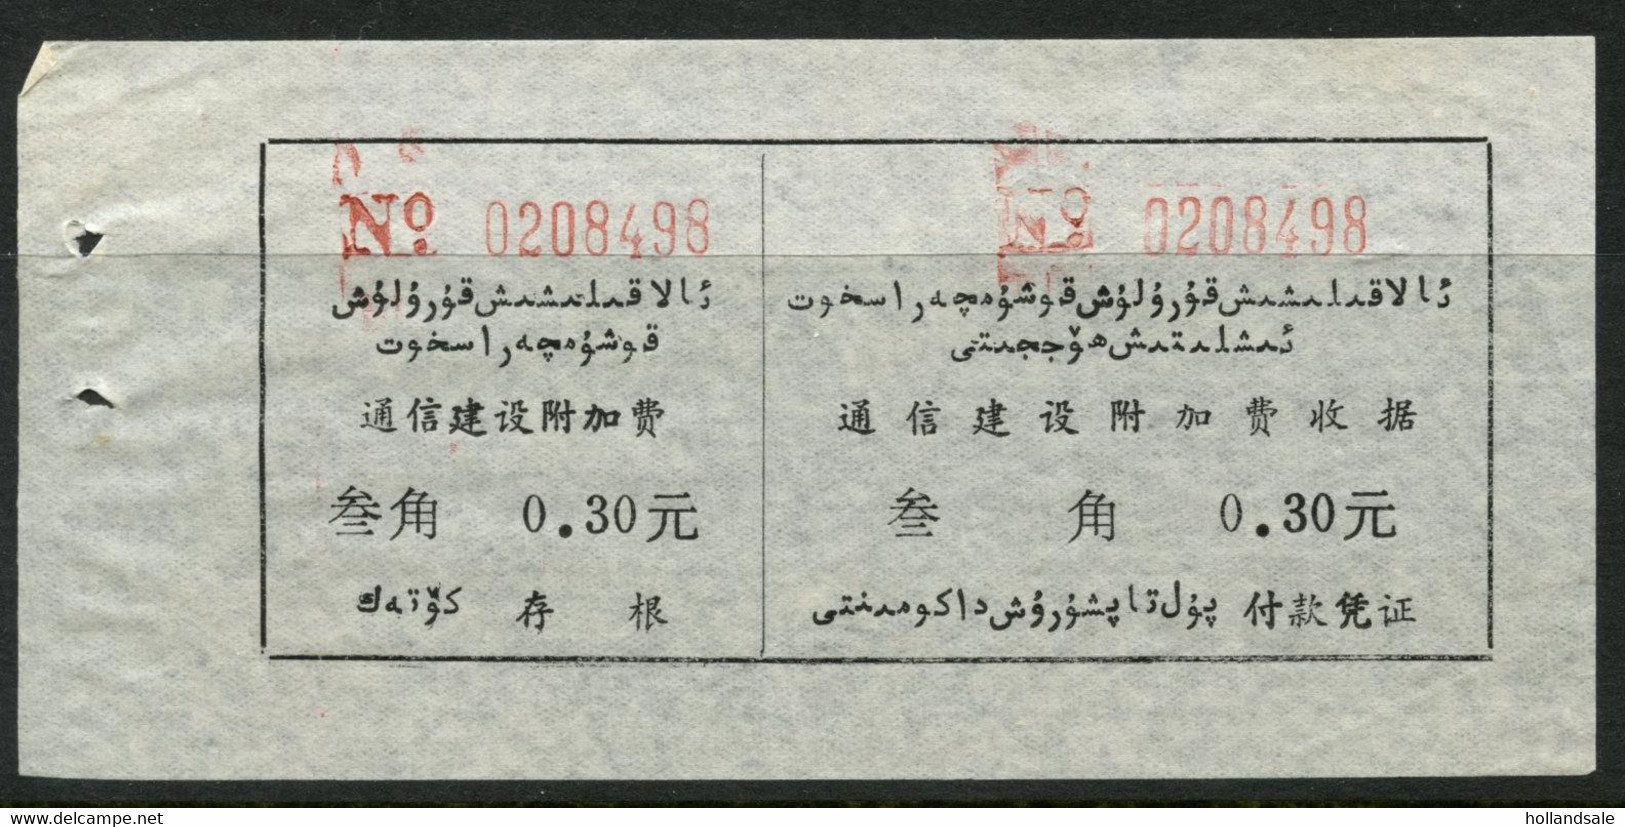 CHINA PRC ADDED CHARGE LABELS - 20f Label Of Bachu County, Xinjiang Prov. D&O #27-0506. - Portomarken